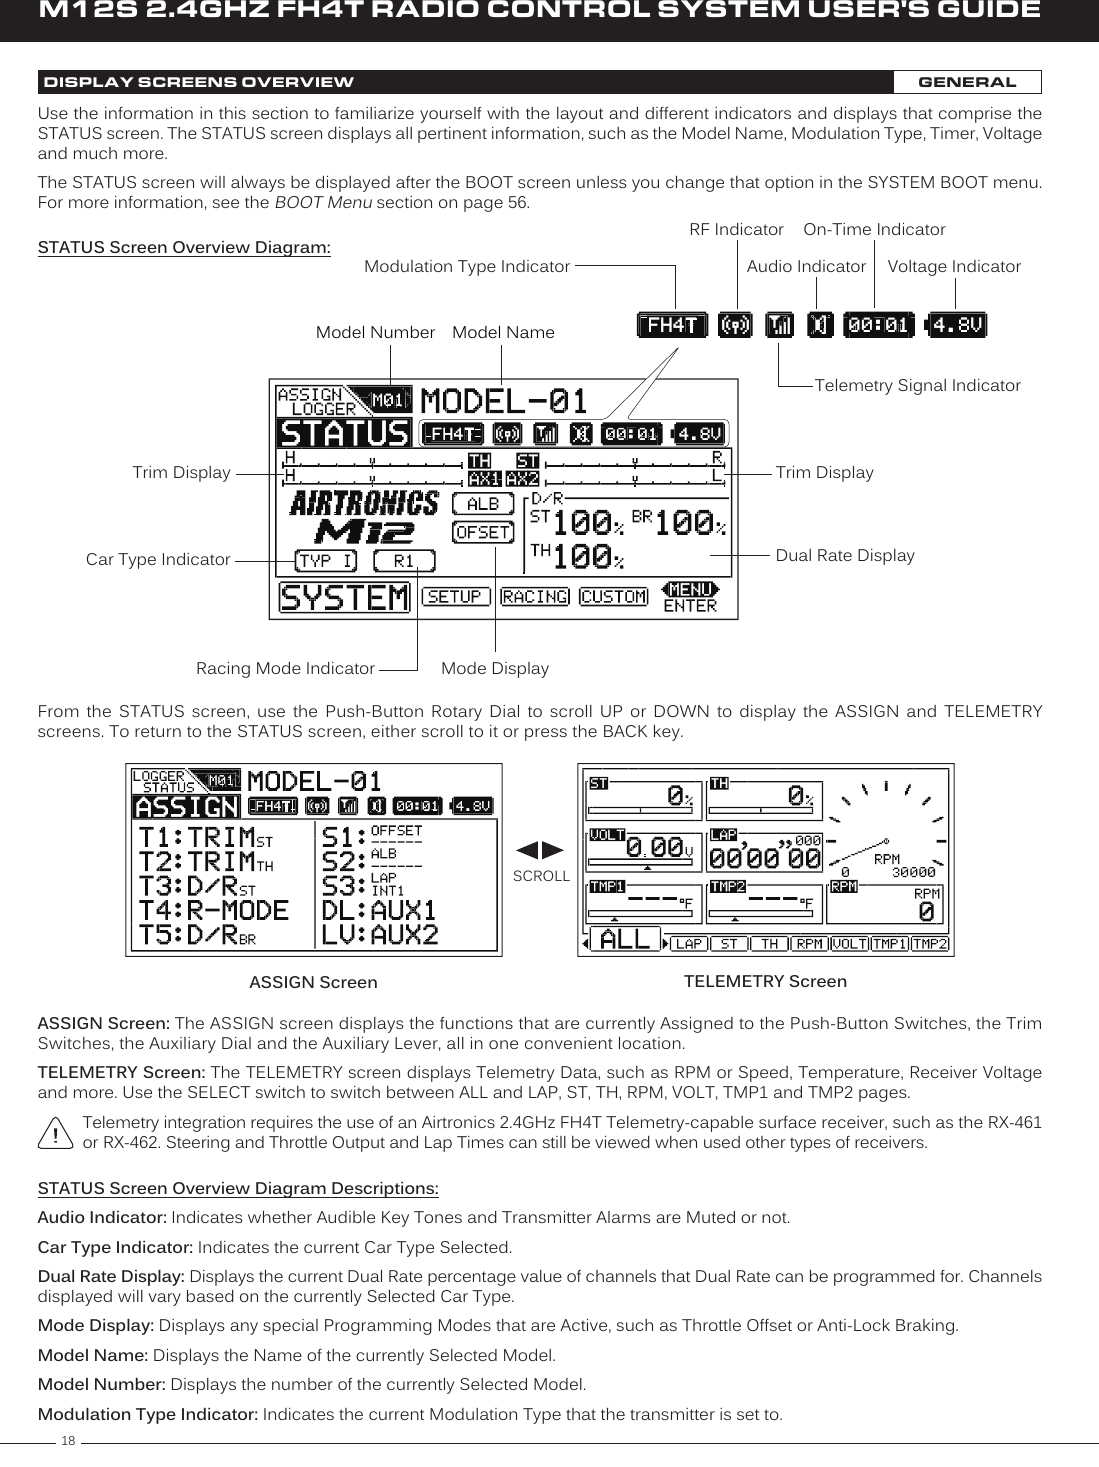 18M12S 2.4GHZ FH4T RADIO CONTROL SYSTEM USER&apos;S GUIDEUse the information in this section to familiarize yourself with the layout and different indicators and displays that comprise the STATUS screen. The STATUS screen displays all pertinent information, such as the Model Name, Modulation Type, Timer, Voltage and much more.The STATUS screen will always be displayed after the BOOT screen unless you change that option in the SYSTEM BOOT menu. For more information, see the BOOT Menu section on page 56.Model Number Model NameVoltage IndicatorTelemetry Signal IndicatorModulation Type IndicatorOn-Time IndicatorAudio IndicatorRF IndicatorTrim DisplayDual Rate DisplayMode DisplayCar Type IndicatorRacing Mode IndicatorTrim DisplayDISPLAY SCREENS OVERVIEW GENERALASSIGN Screen: The ASSIGN screen displays the functions that are currently Assigned to the Push-Button Switches, the Trim Switches, the Auxiliary Dial and the Auxiliary Lever, all in one convenient location.TELEMETRY Screen: The TELEMETRY screen displays Telemetry Data, such as RPM or Speed, Temperature, Receiver Voltage and more. Use the SELECT switch to switch between ALL and LAP, ST, TH, RPM, VOLT, TMP1 and TMP2 pages.Telemetry integration requires the use of an Airtronics 2.4GHz FH4T Telemetry-capable surface receiver, such as the RX-461 or RX-462. Steering and Throttle Output and Lap Times can still be viewed when used other types of receivers.TELEMETRY ScreenASSIGN ScreenFrom  the  STATUS  screen,  use  the  Push-Button  Rotary  Dial  to  scroll  UP  or  DOWN  to  display  the  ASSIGN  and  TELEMETRY screens. To return to the STATUS screen, either scroll to it or press the BACK key.SCROLLSTATUS Screen Overview Diagram Descriptions:Audio Indicator: Indicates whether Audible Key Tones and Transmitter Alarms are Muted or not.Car Type Indicator: Indicates the current Car Type Selected.Dual Rate Display: Displays the current Dual Rate percentage value of channels that Dual Rate can be programmed for. Channels displayed will vary based on the currently Selected Car Type.Mode Display: Displays any special Programming Modes that are Active, such as Throttle Offset or Anti-Lock Braking.Model Name: Displays the Name of the currently Selected Model.Model Number: Displays the number of the currently Selected Model.Modulation Type Indicator: Indicates the current Modulation Type that the transmitter is set to. STATUS Screen Overview Diagram: